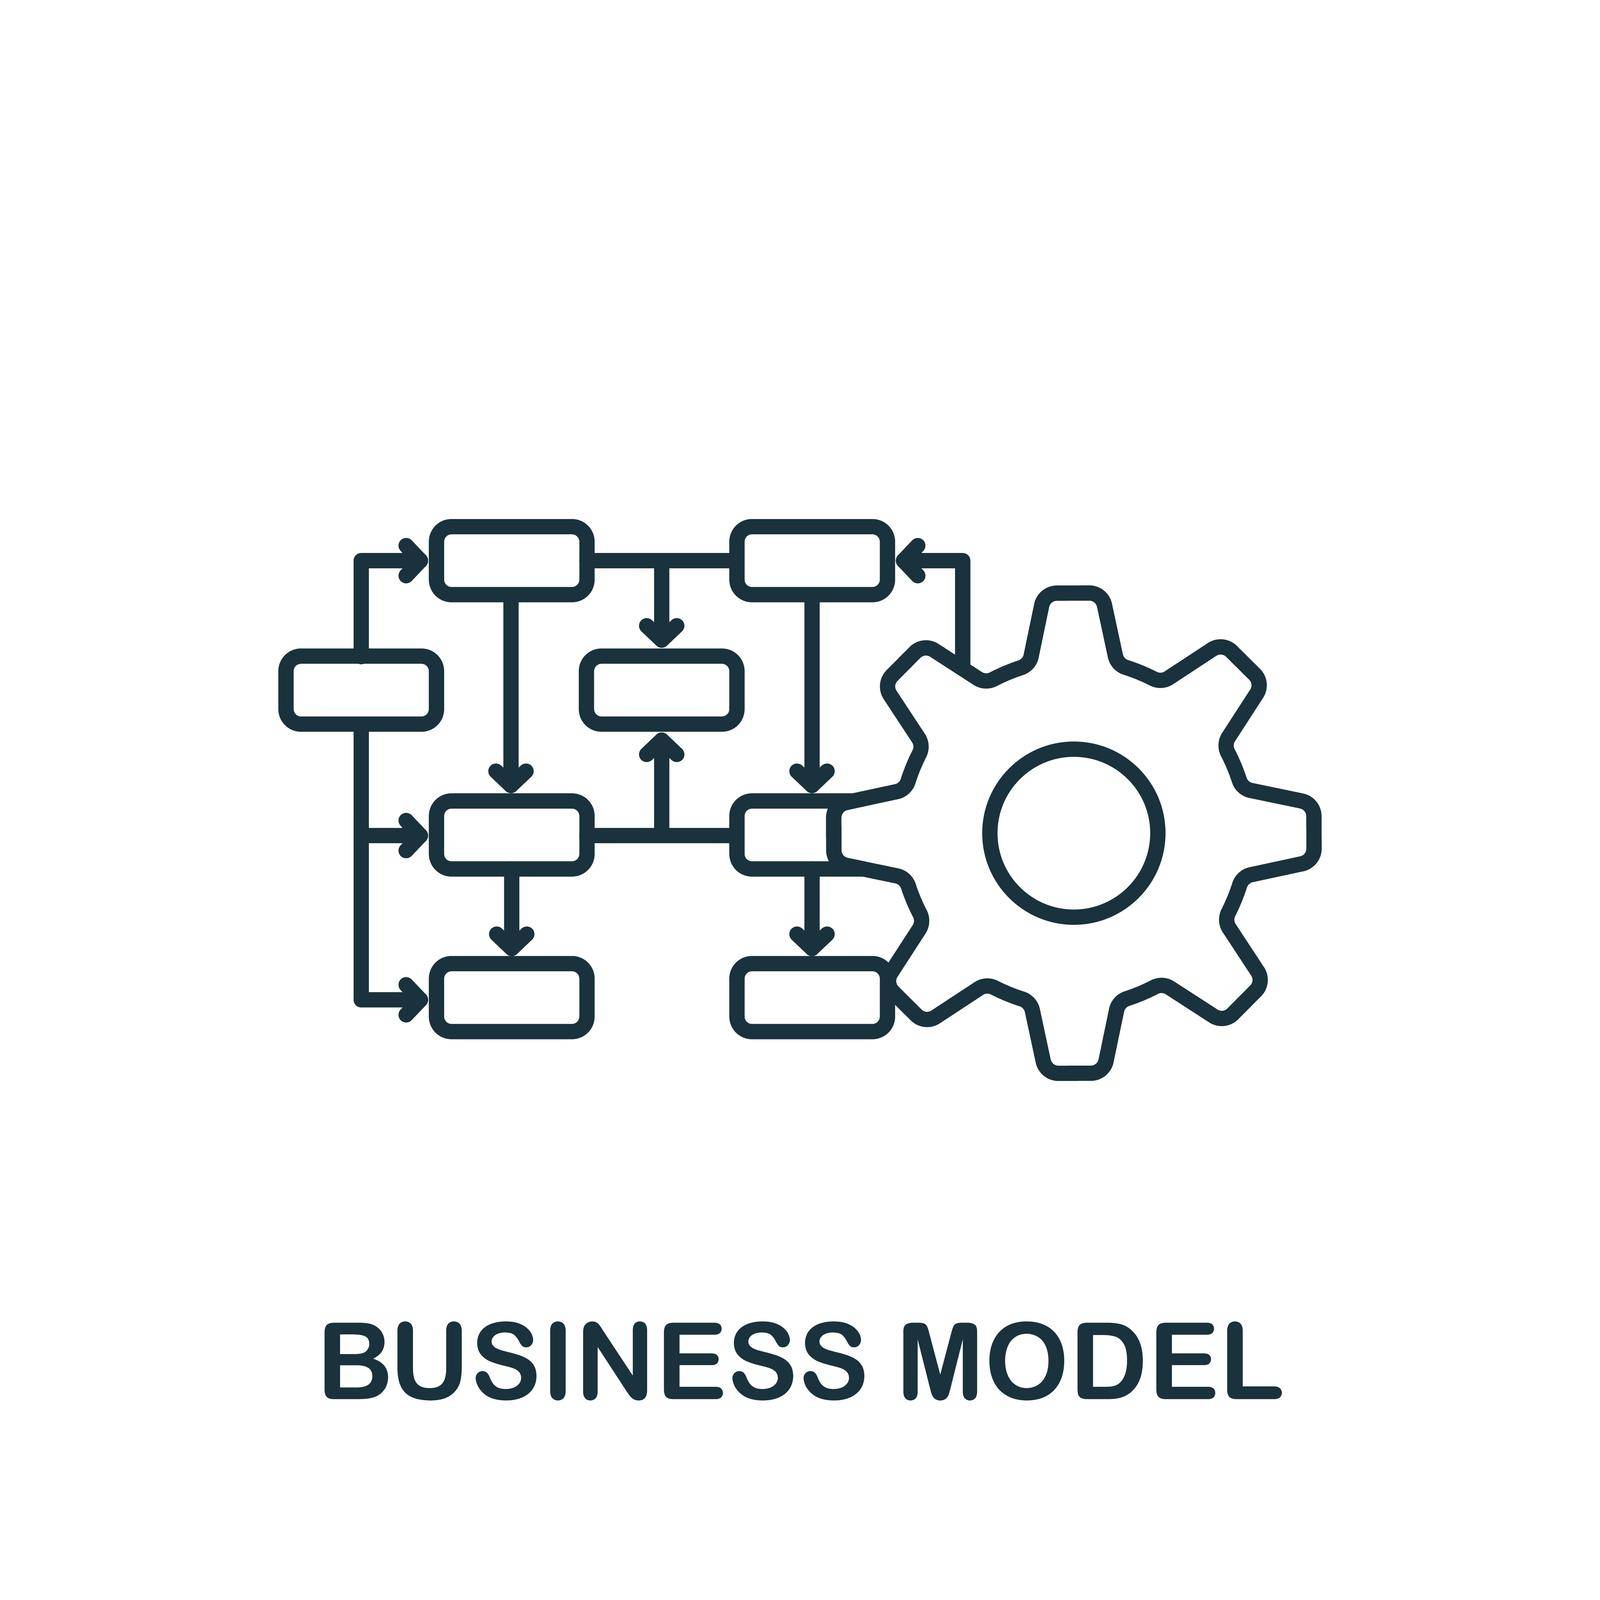 Business Model icon. Line simple Industry 4.0 icon for templates, web design and infographics by simakovavector